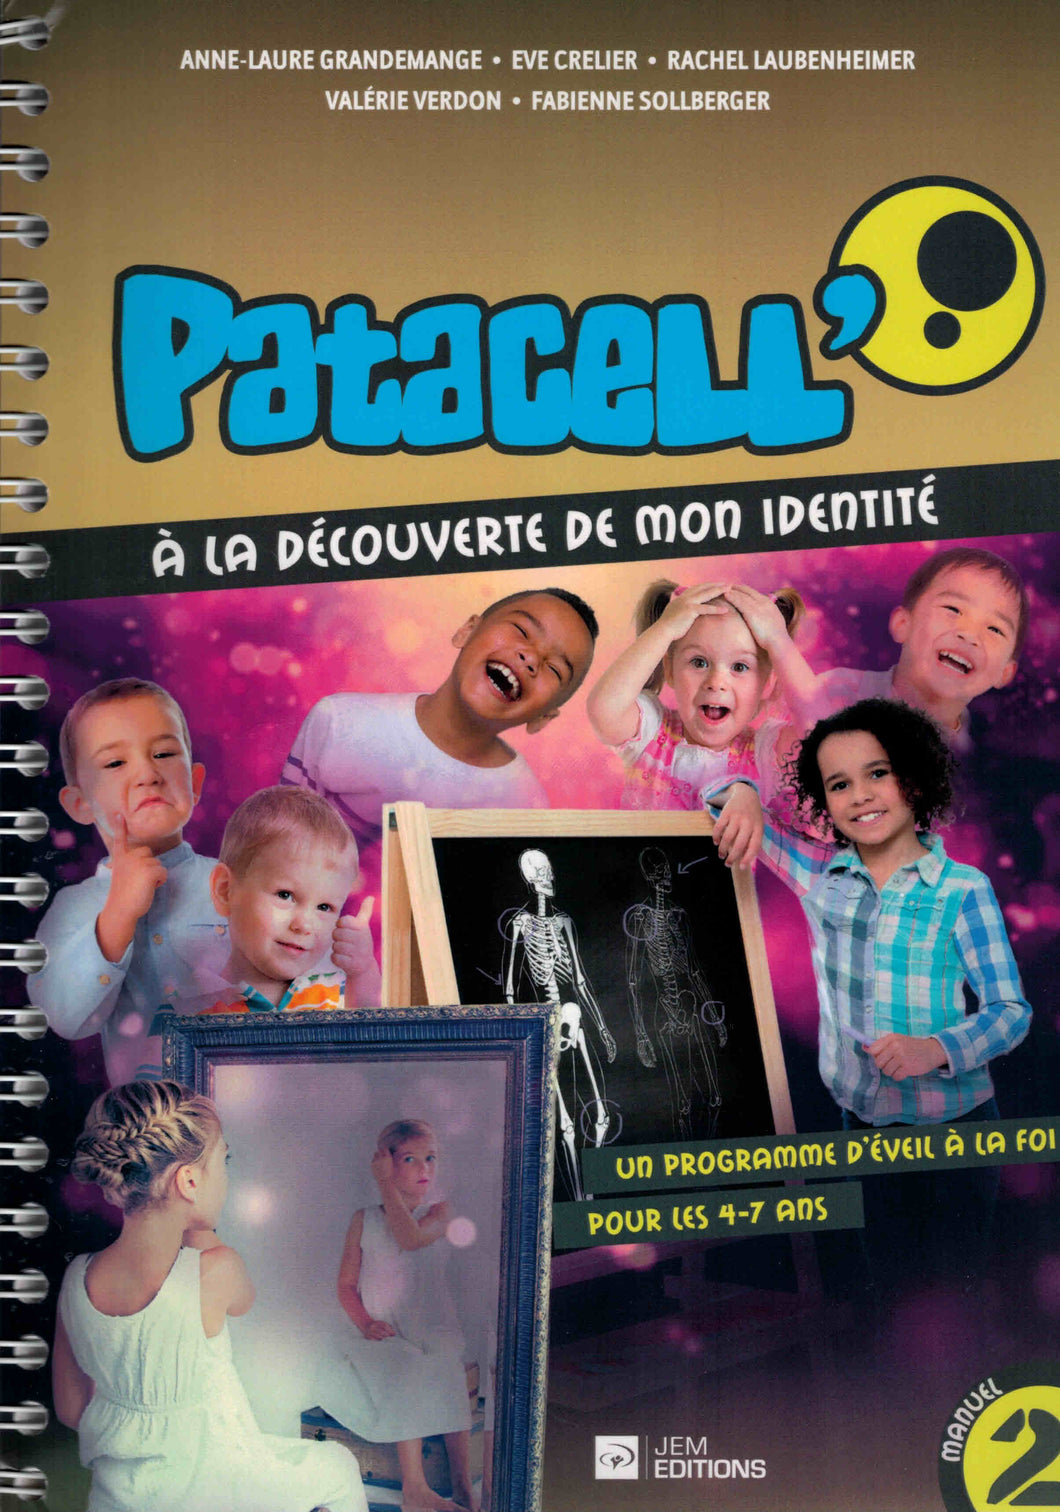 Patacell 2 - Discovering my identity (4 to 7 years old)